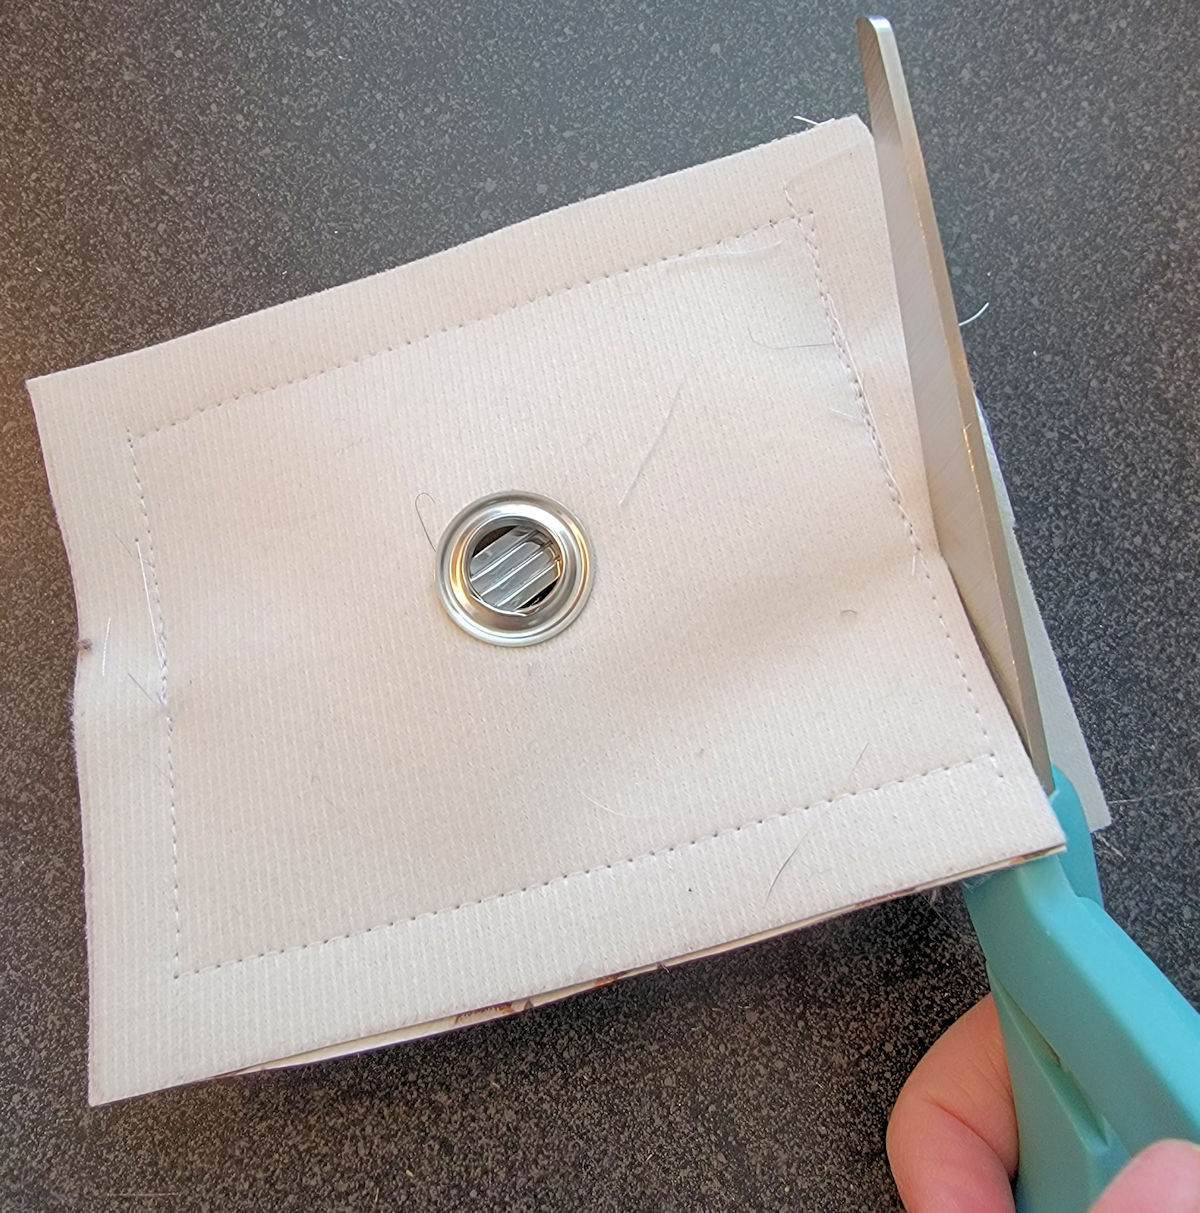 Learn How to Sew a Dog Waste Bag Holder - WeAllSew